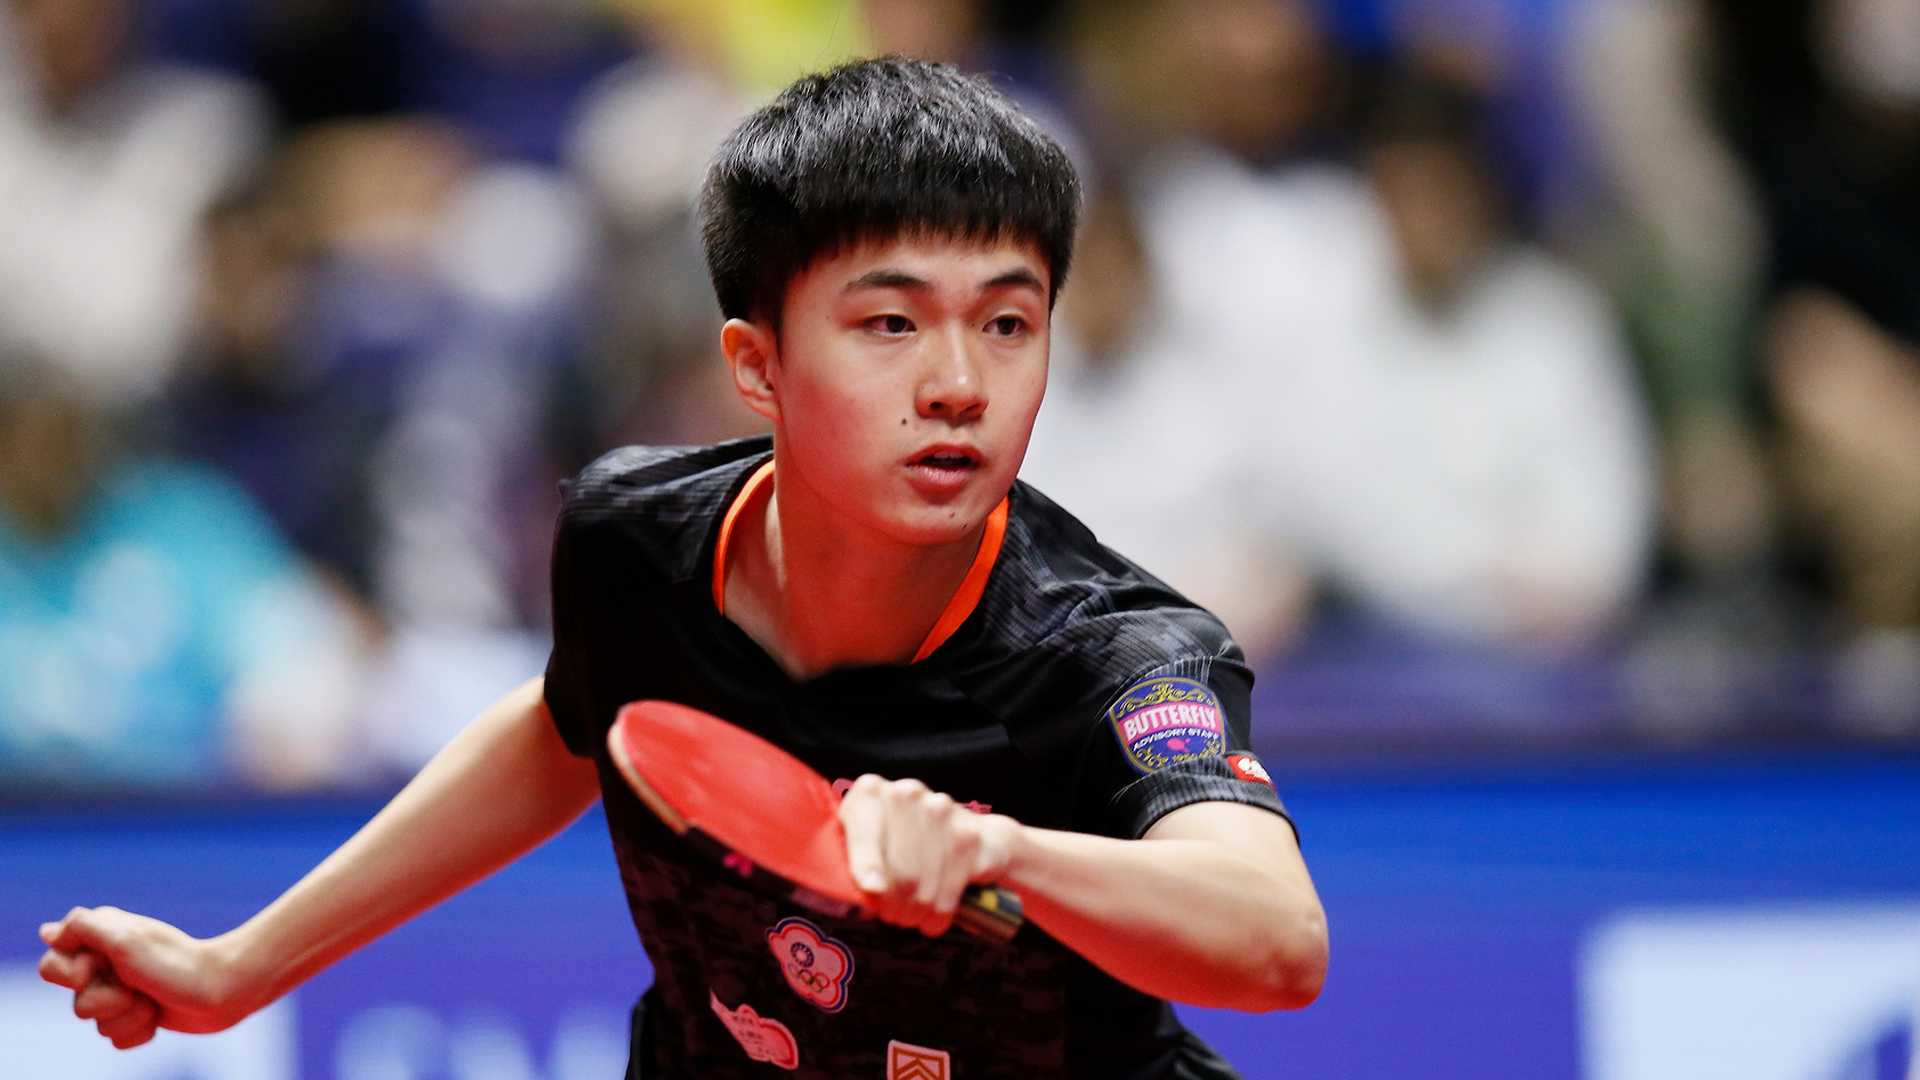 Lin Yun-ju of Chinese Taipei was the victor in the men's singles final at the ITTF Czech Open ©ITTF